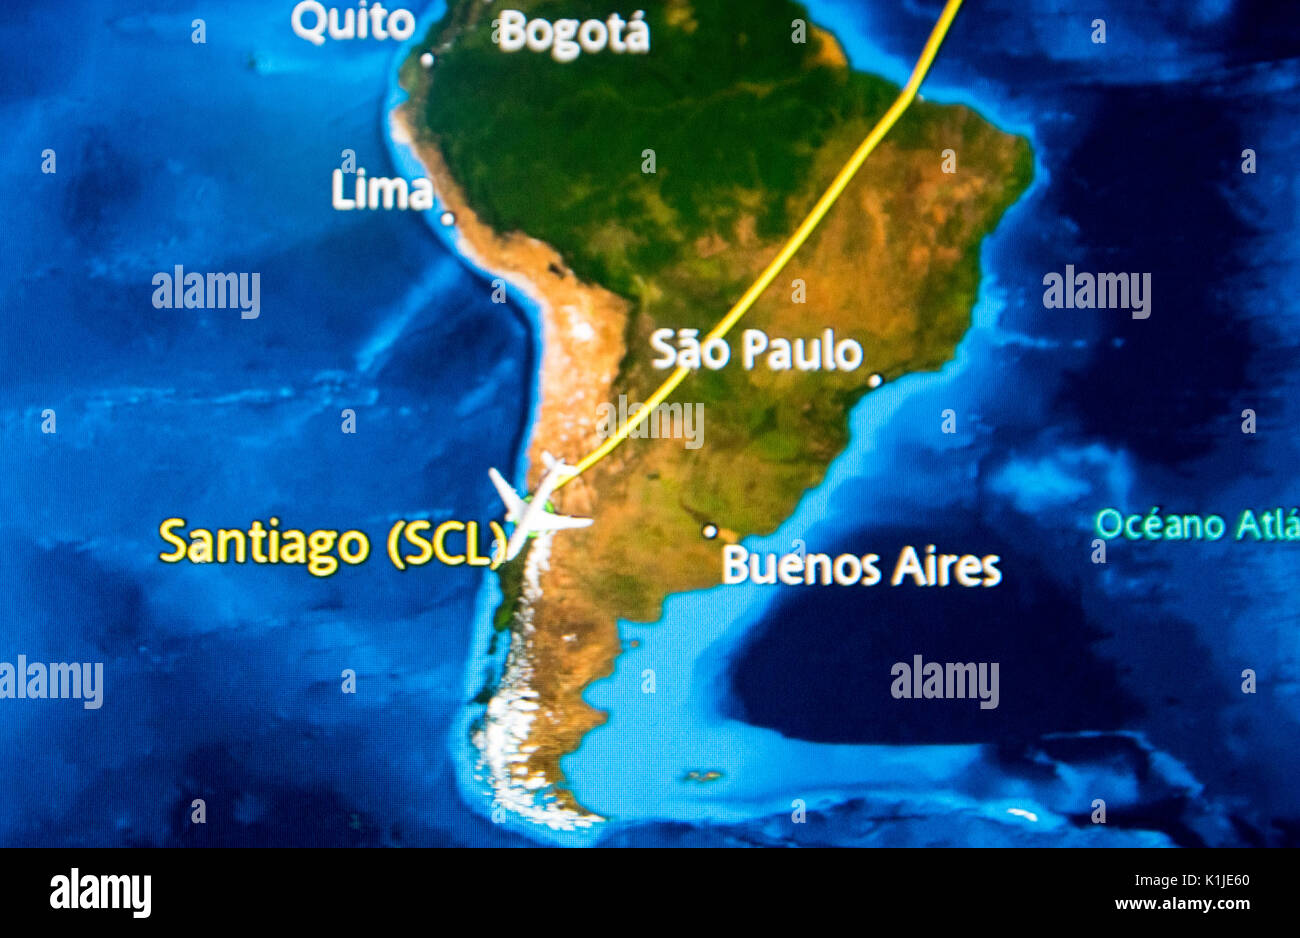 MADRID, SPAIN - JUNE 05, 2017: Detail of a digital map showing the trip from Madrid to Santiago de Chile in south america Stock Photo